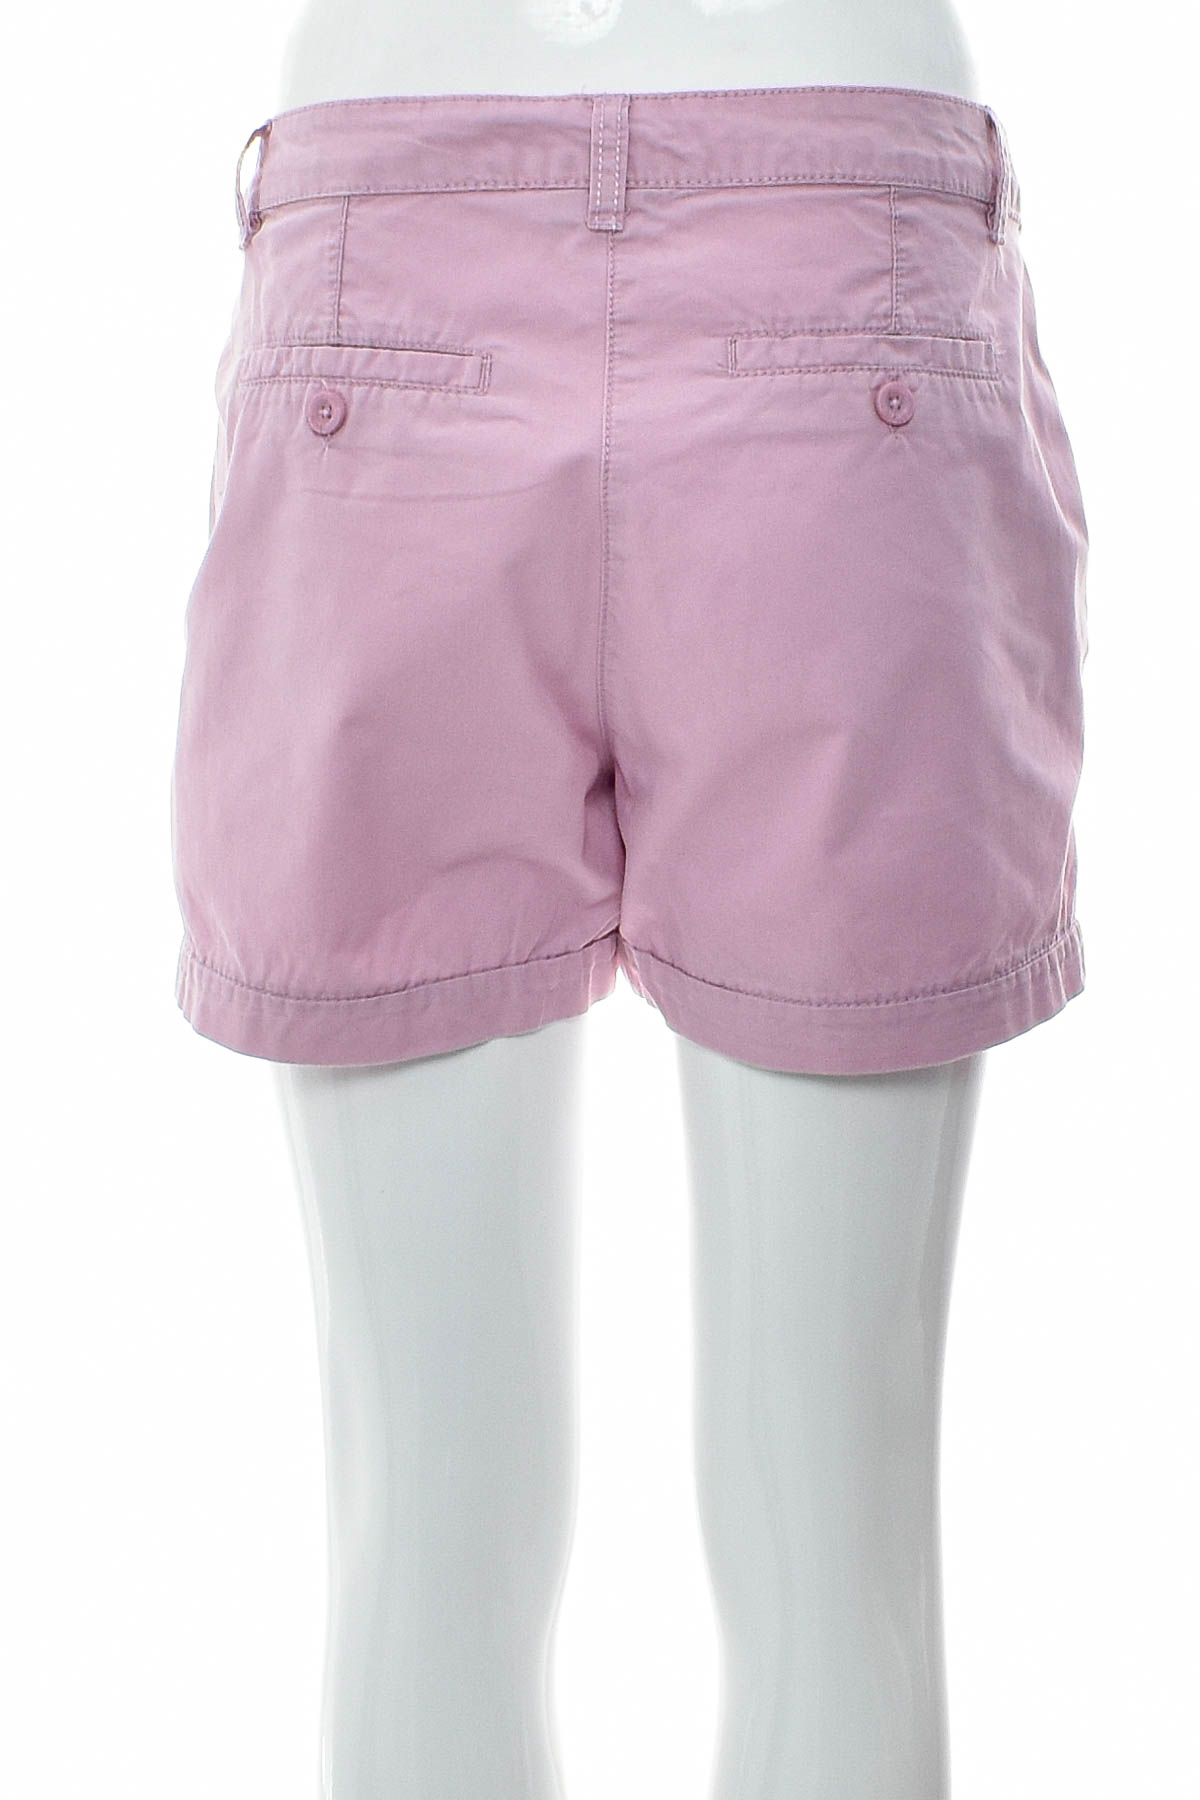 Female shorts - COLOURS OF THE WORLD - 1